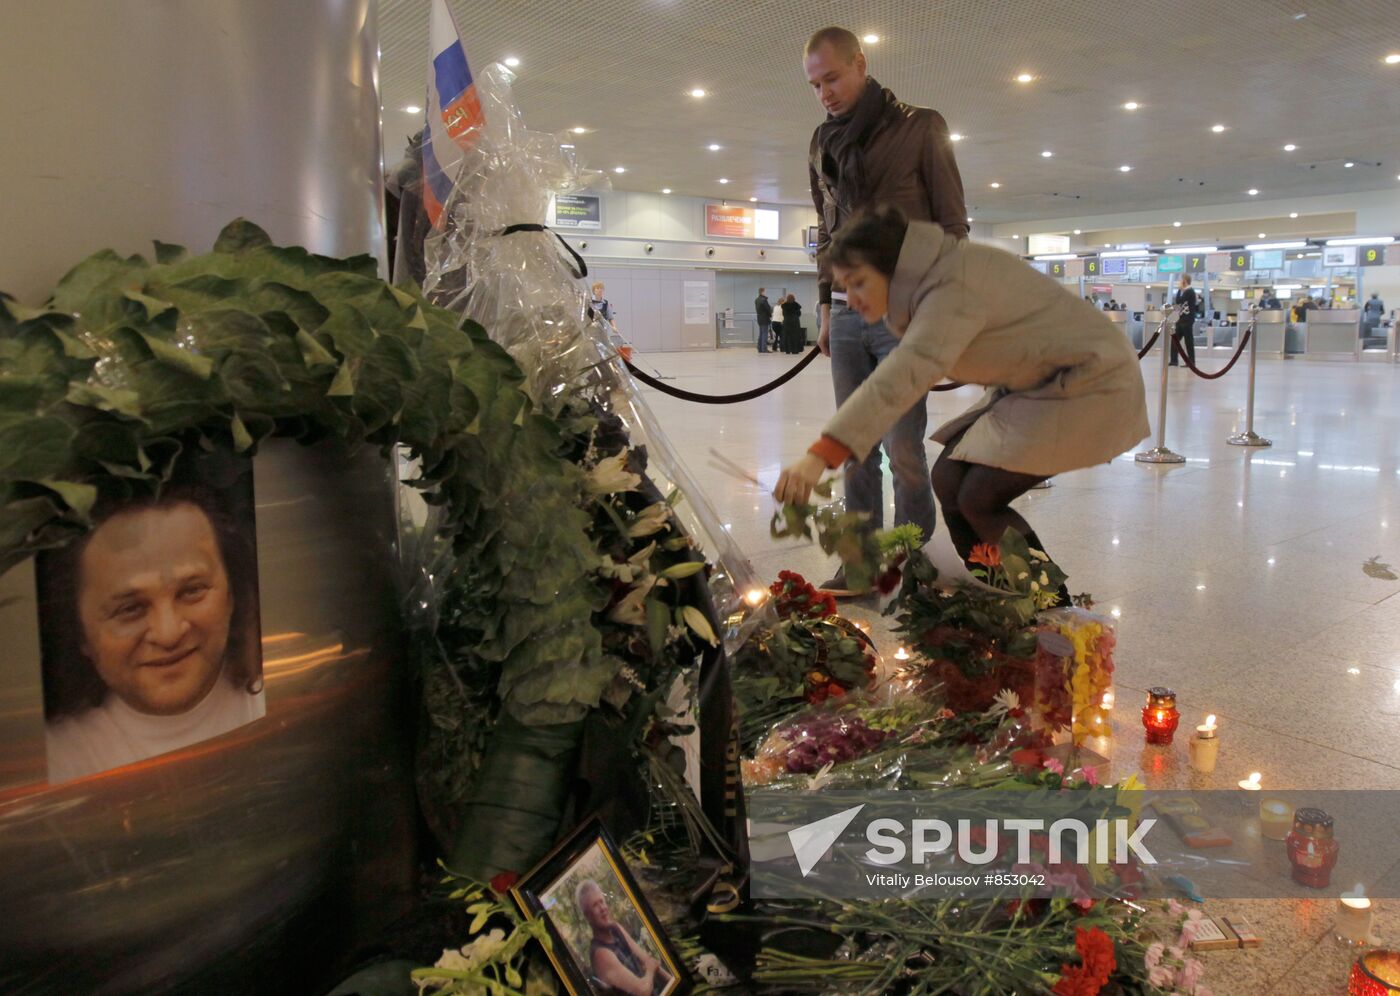 Laying flowers on Domodedovo blast site